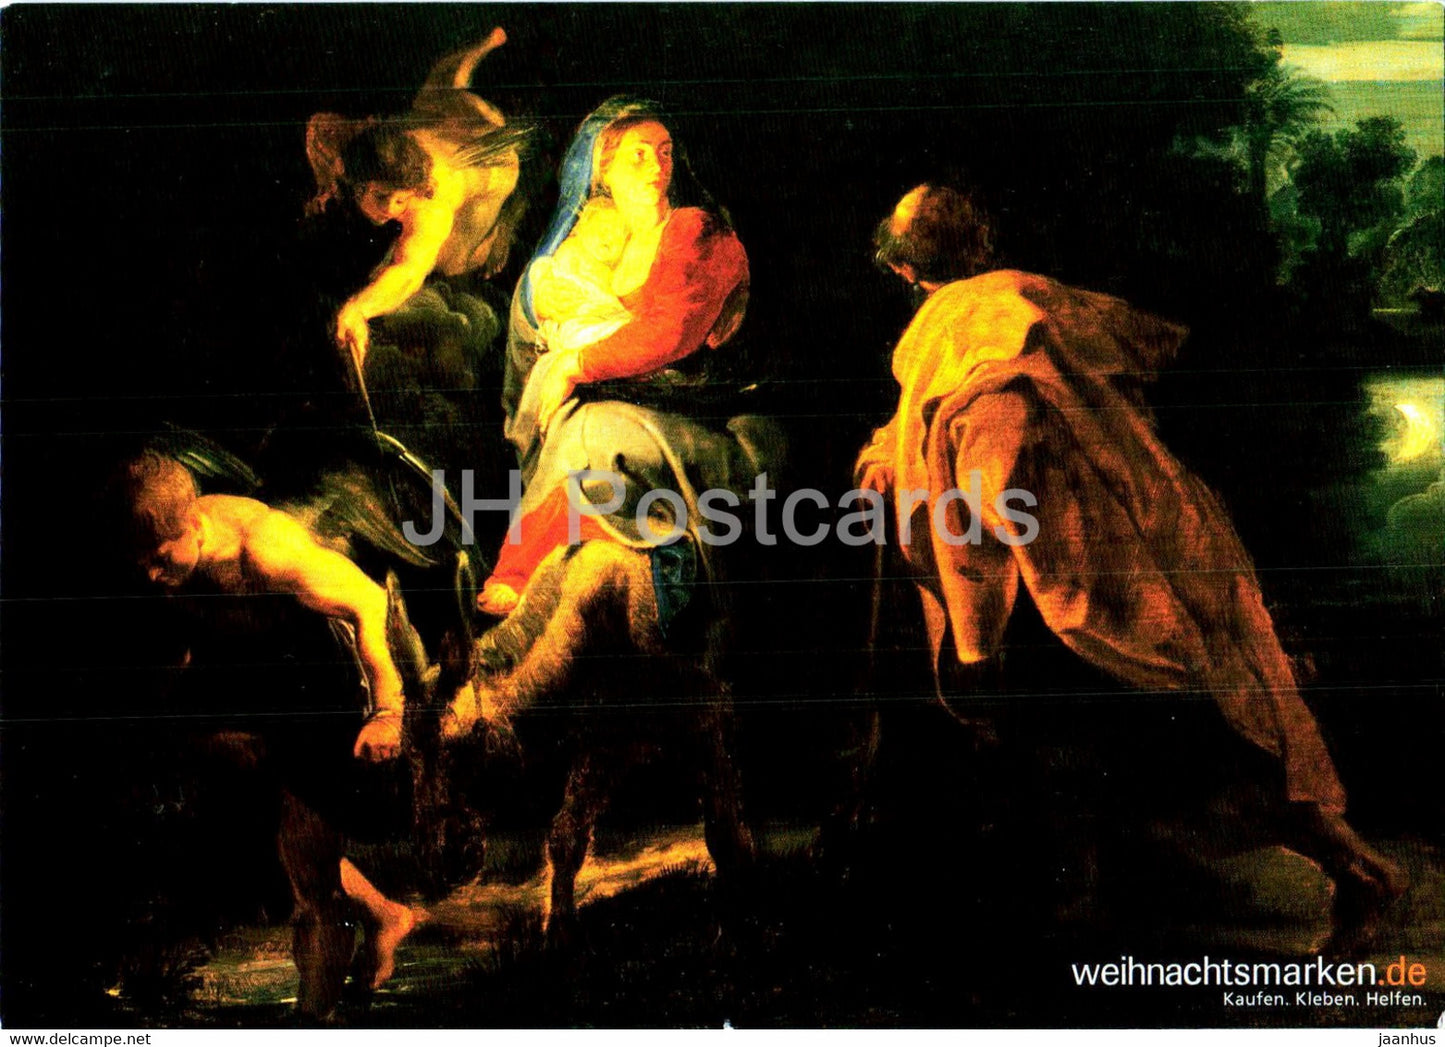 Christmas Greeting Card - painting by Rubens - Die Flucht nach Agypten - Flemish art - Germany - unused - JH Postcards